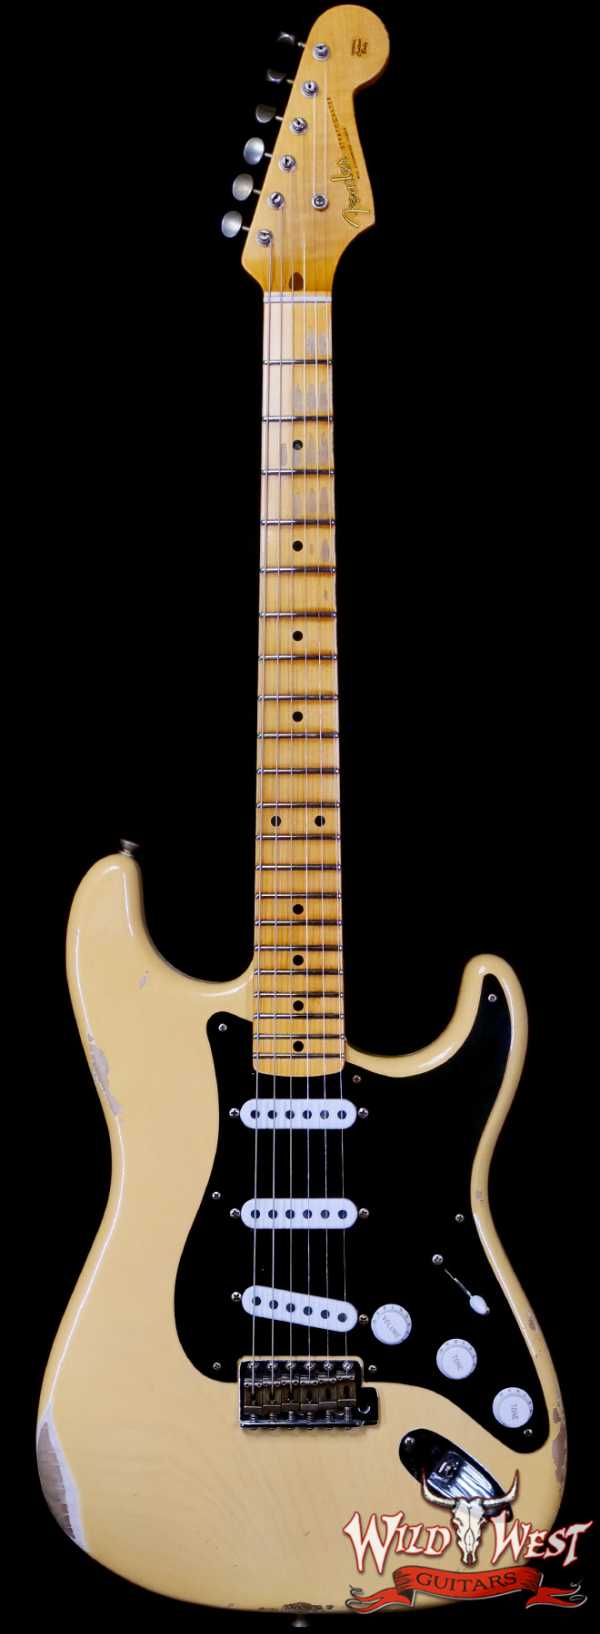 Fender Custom Shop Limited Edition 70th Anniversary 1954 Stratocaster Relic Nocaster Blonde with Black Pickguard 7.55 LBS